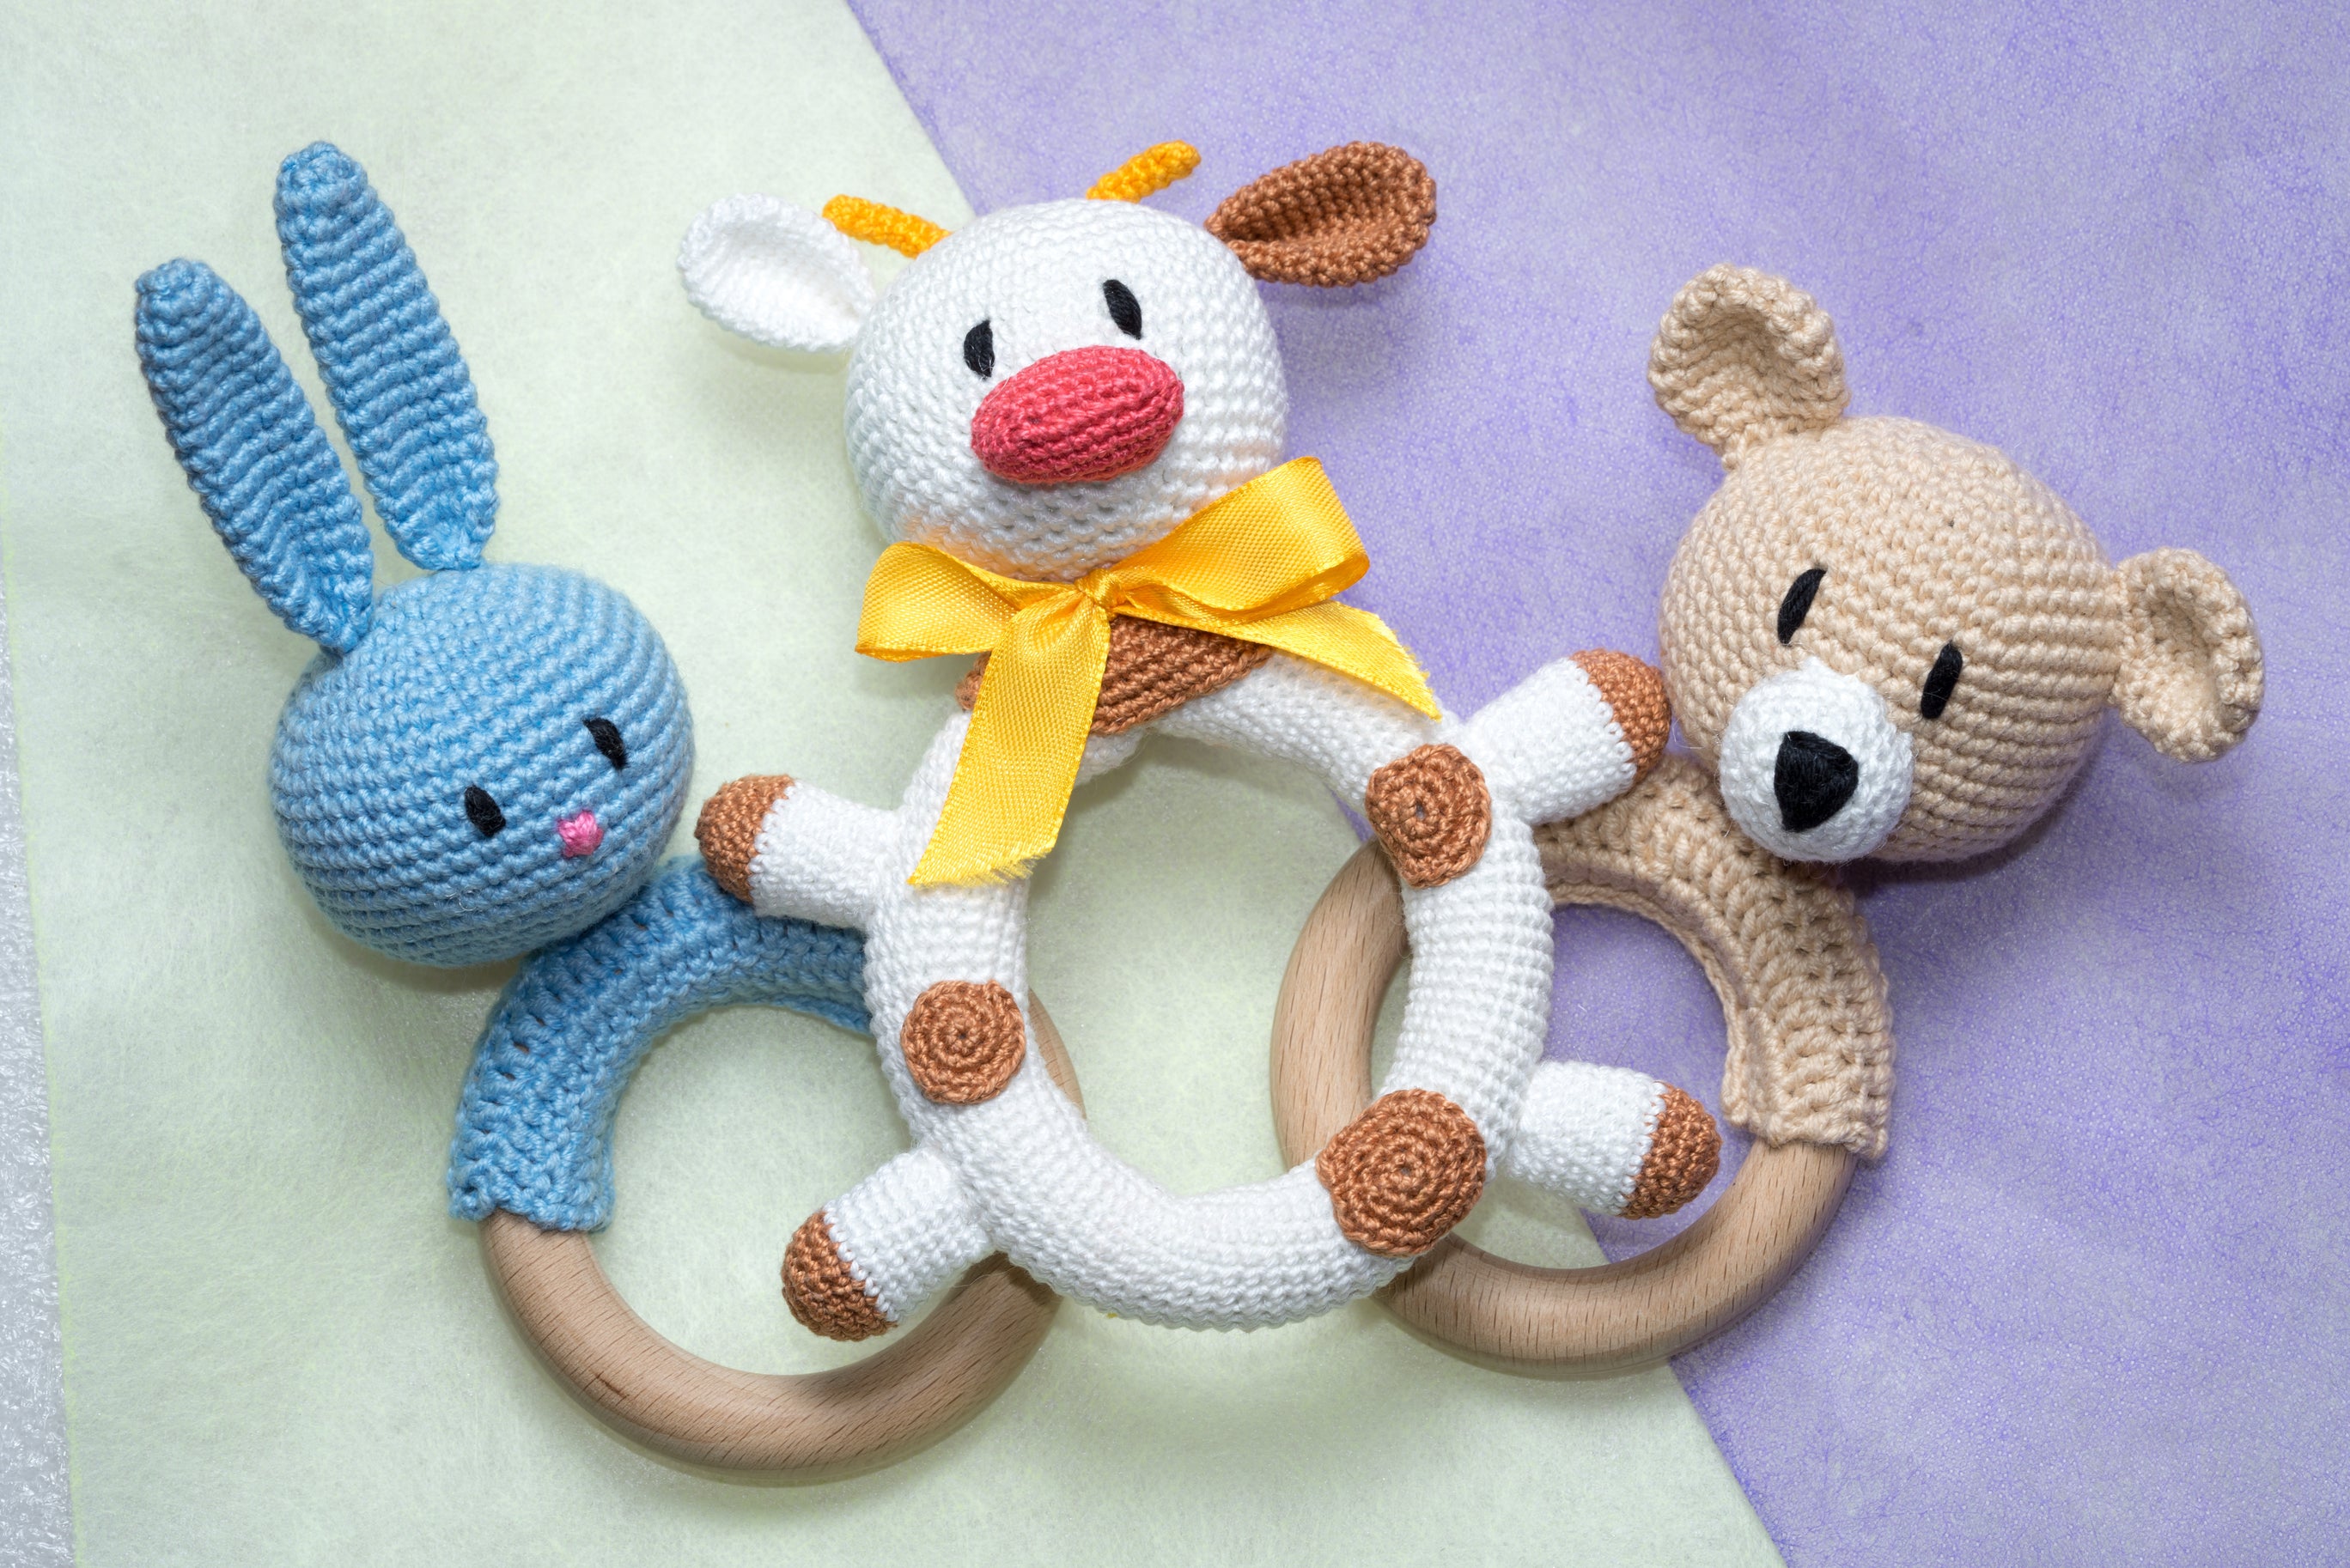 Three home made crochet or amigurumi baby rattle in the shape of a rabbit, bull, and bear 